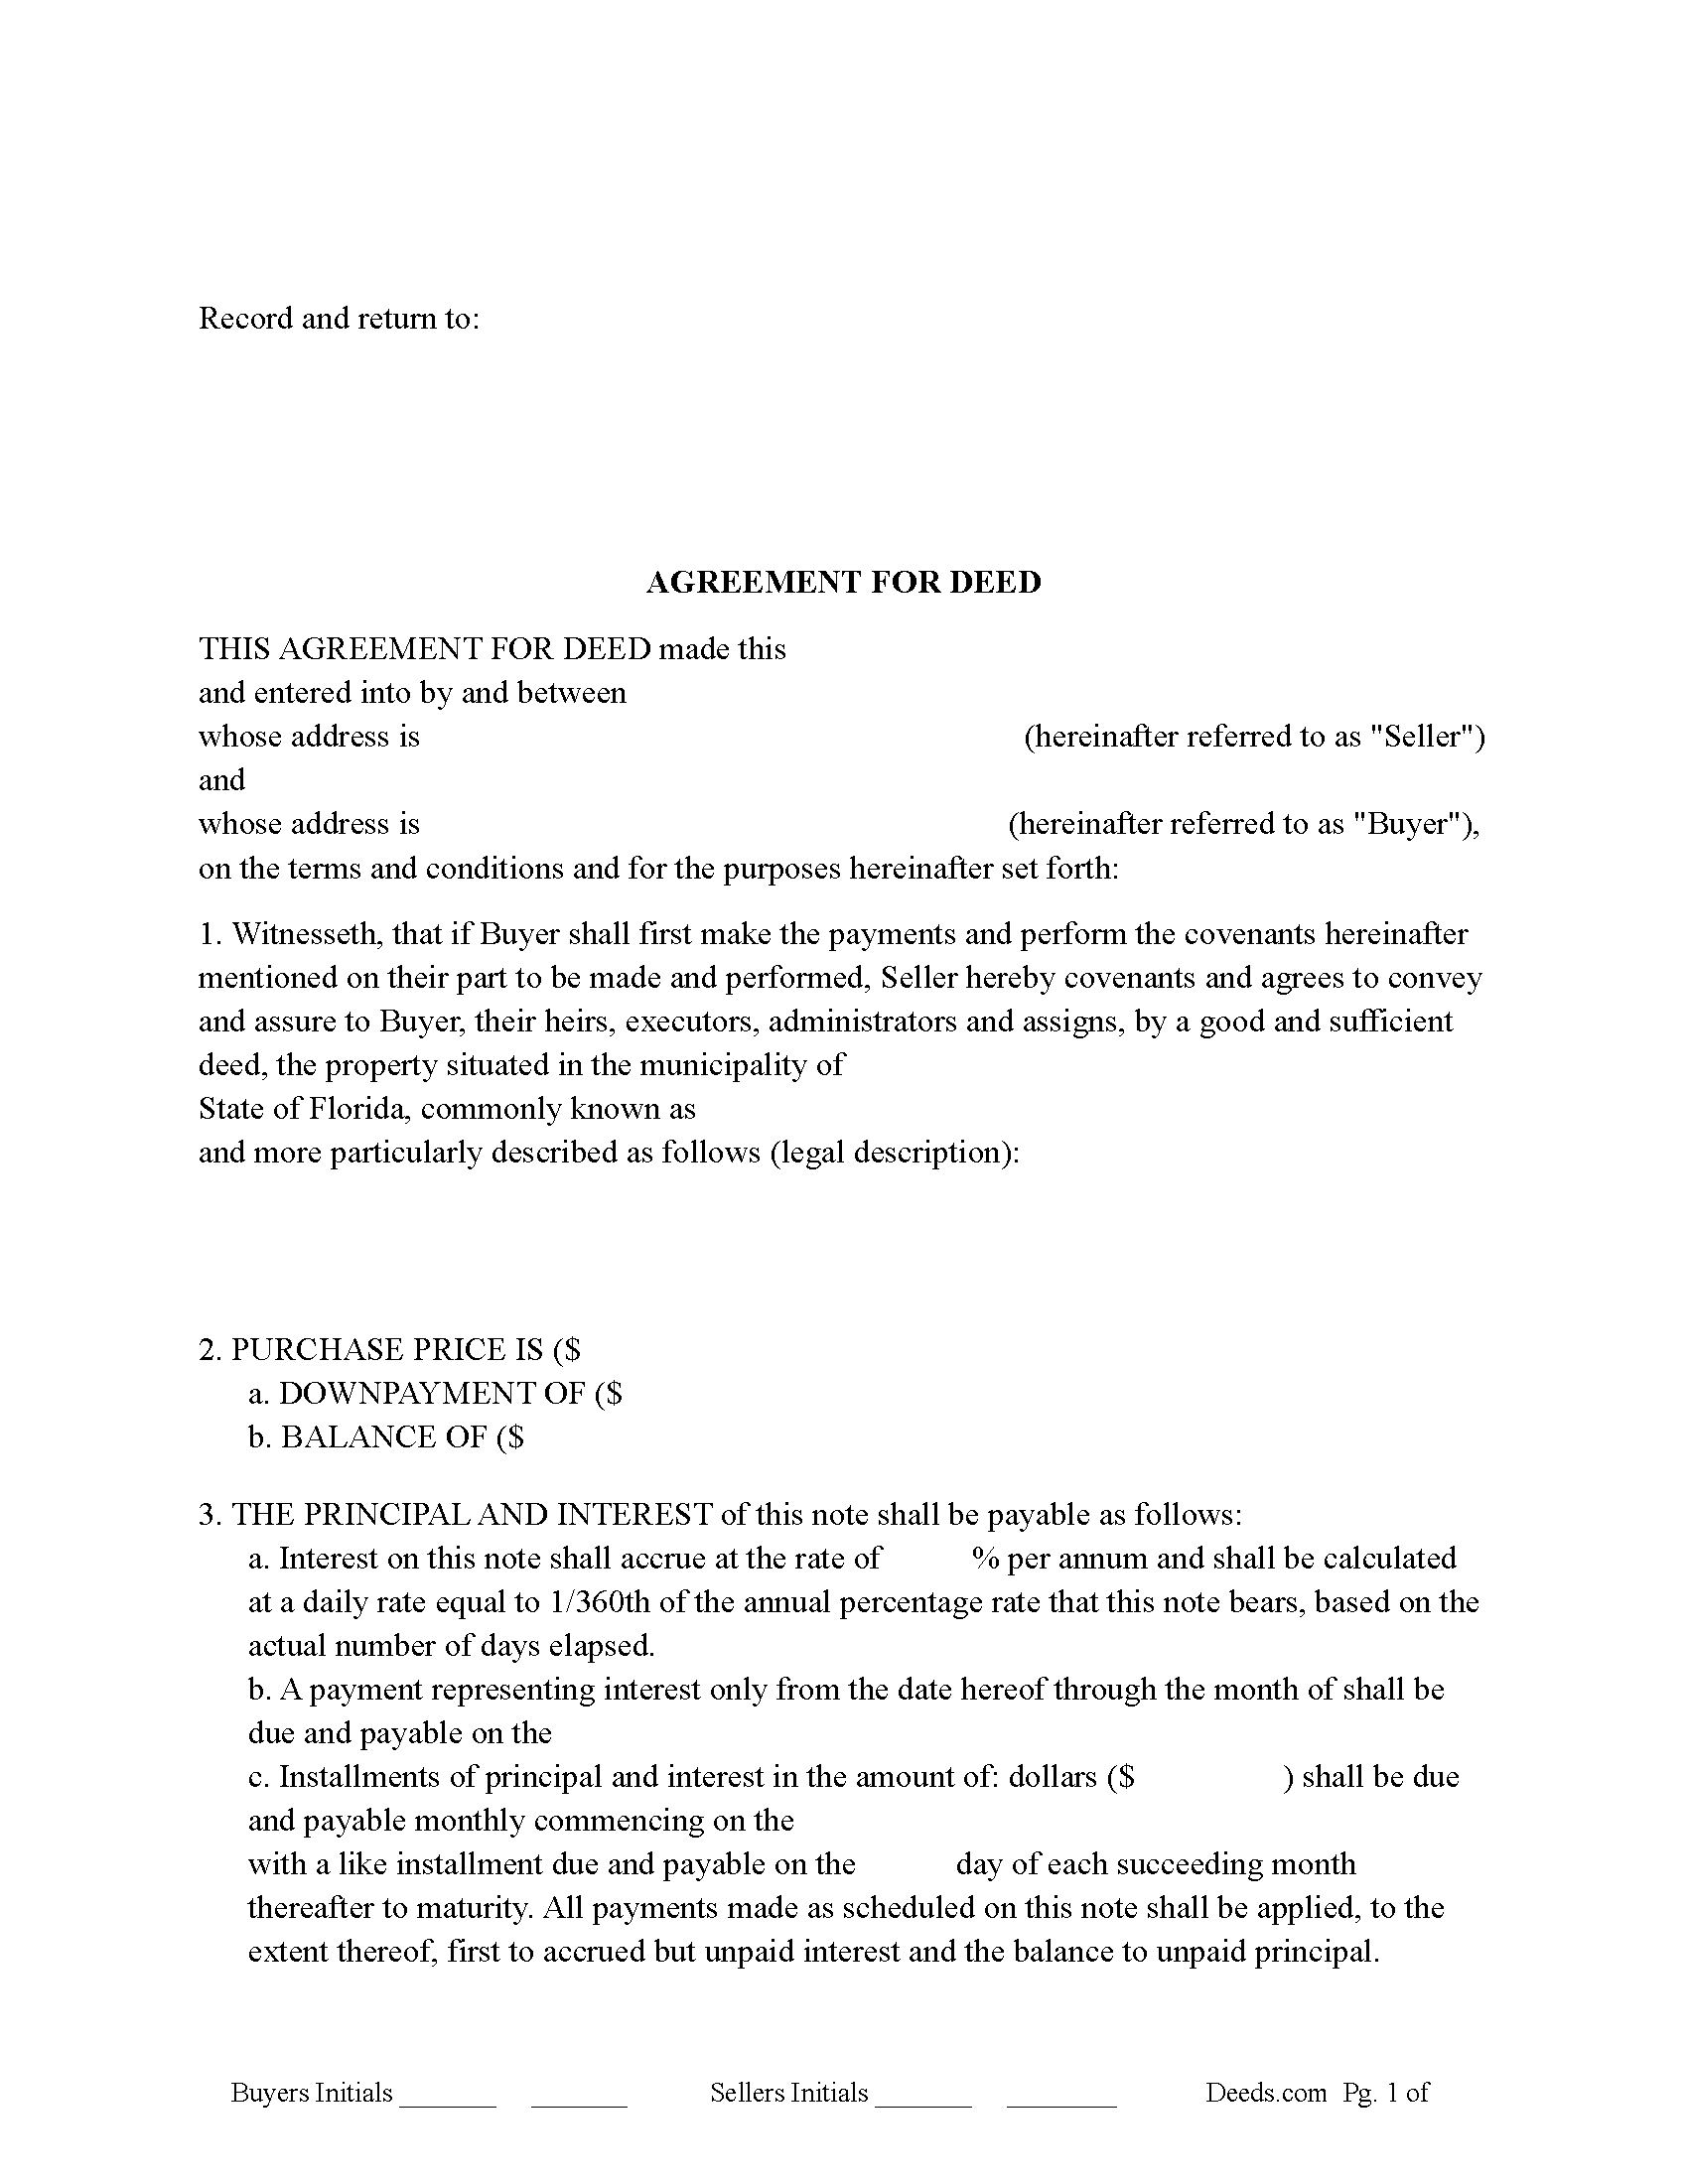 Volusia County Agreement for Deed Form